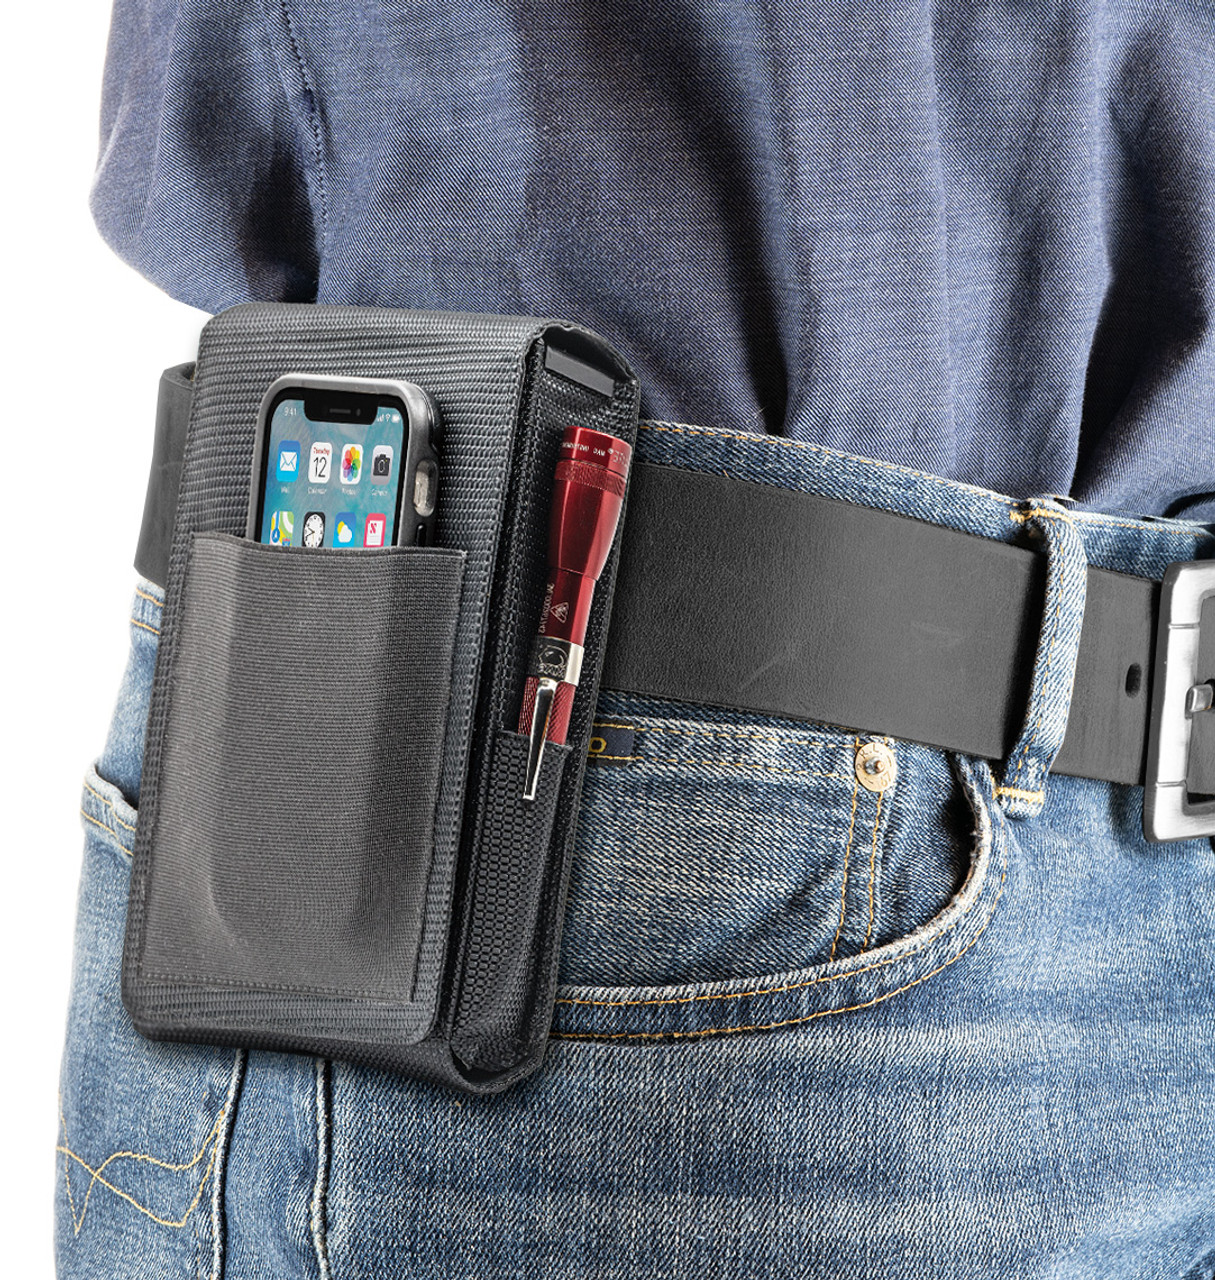 The Taurus G2S Perfect Holster